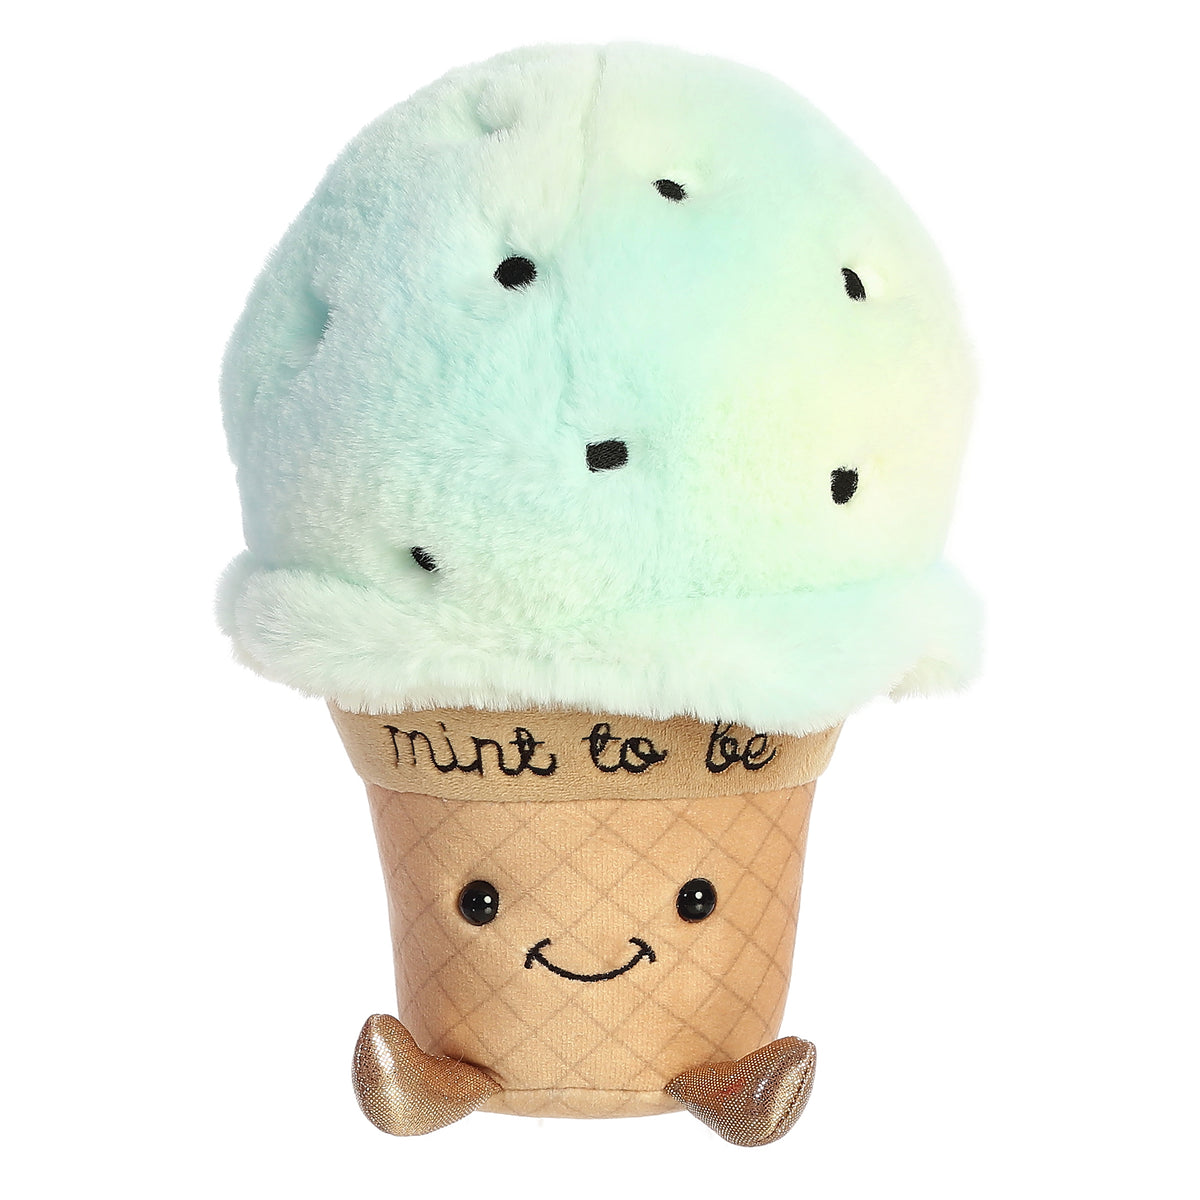 Smiling ice cream cone plush with mint chocolate chip flavor and "mint to be" text, from Aurora's Just Sayin' collection.